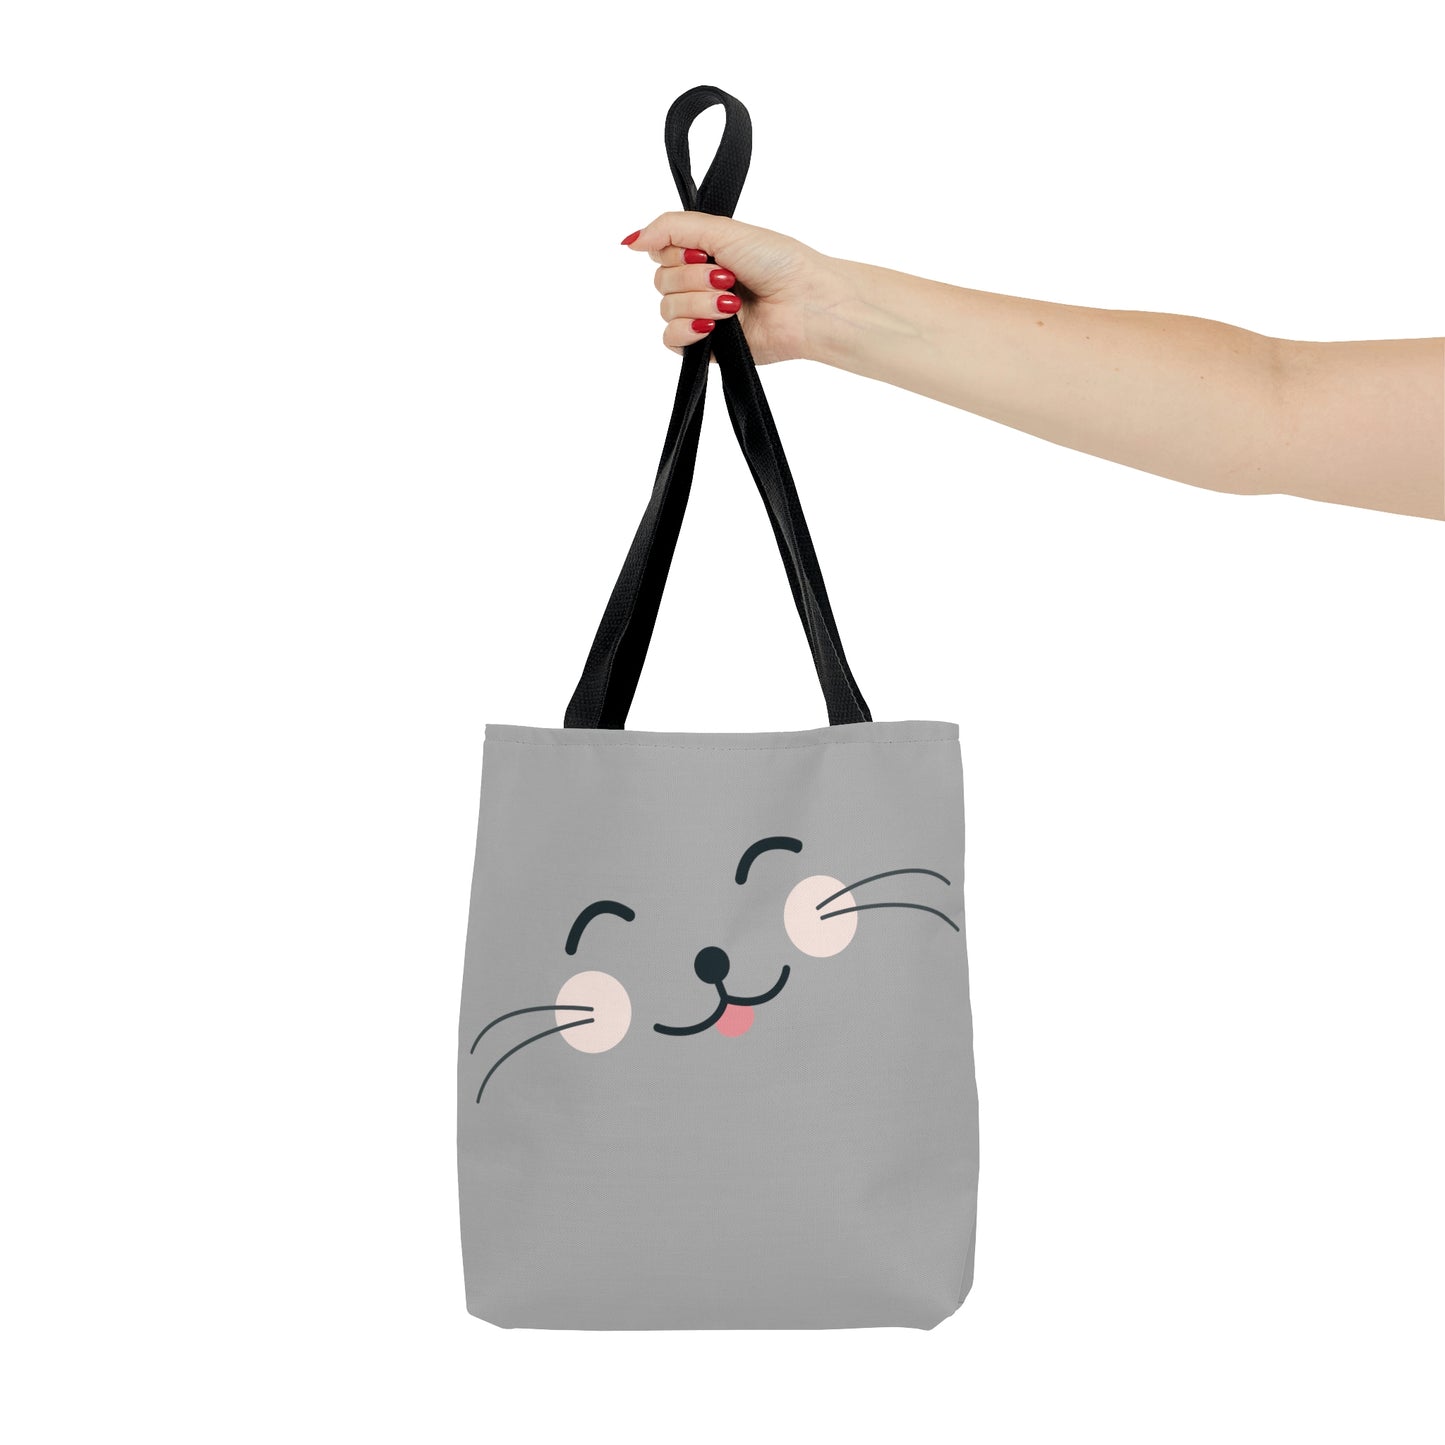 Mock up of a woman holding the small tote bag by the black handles